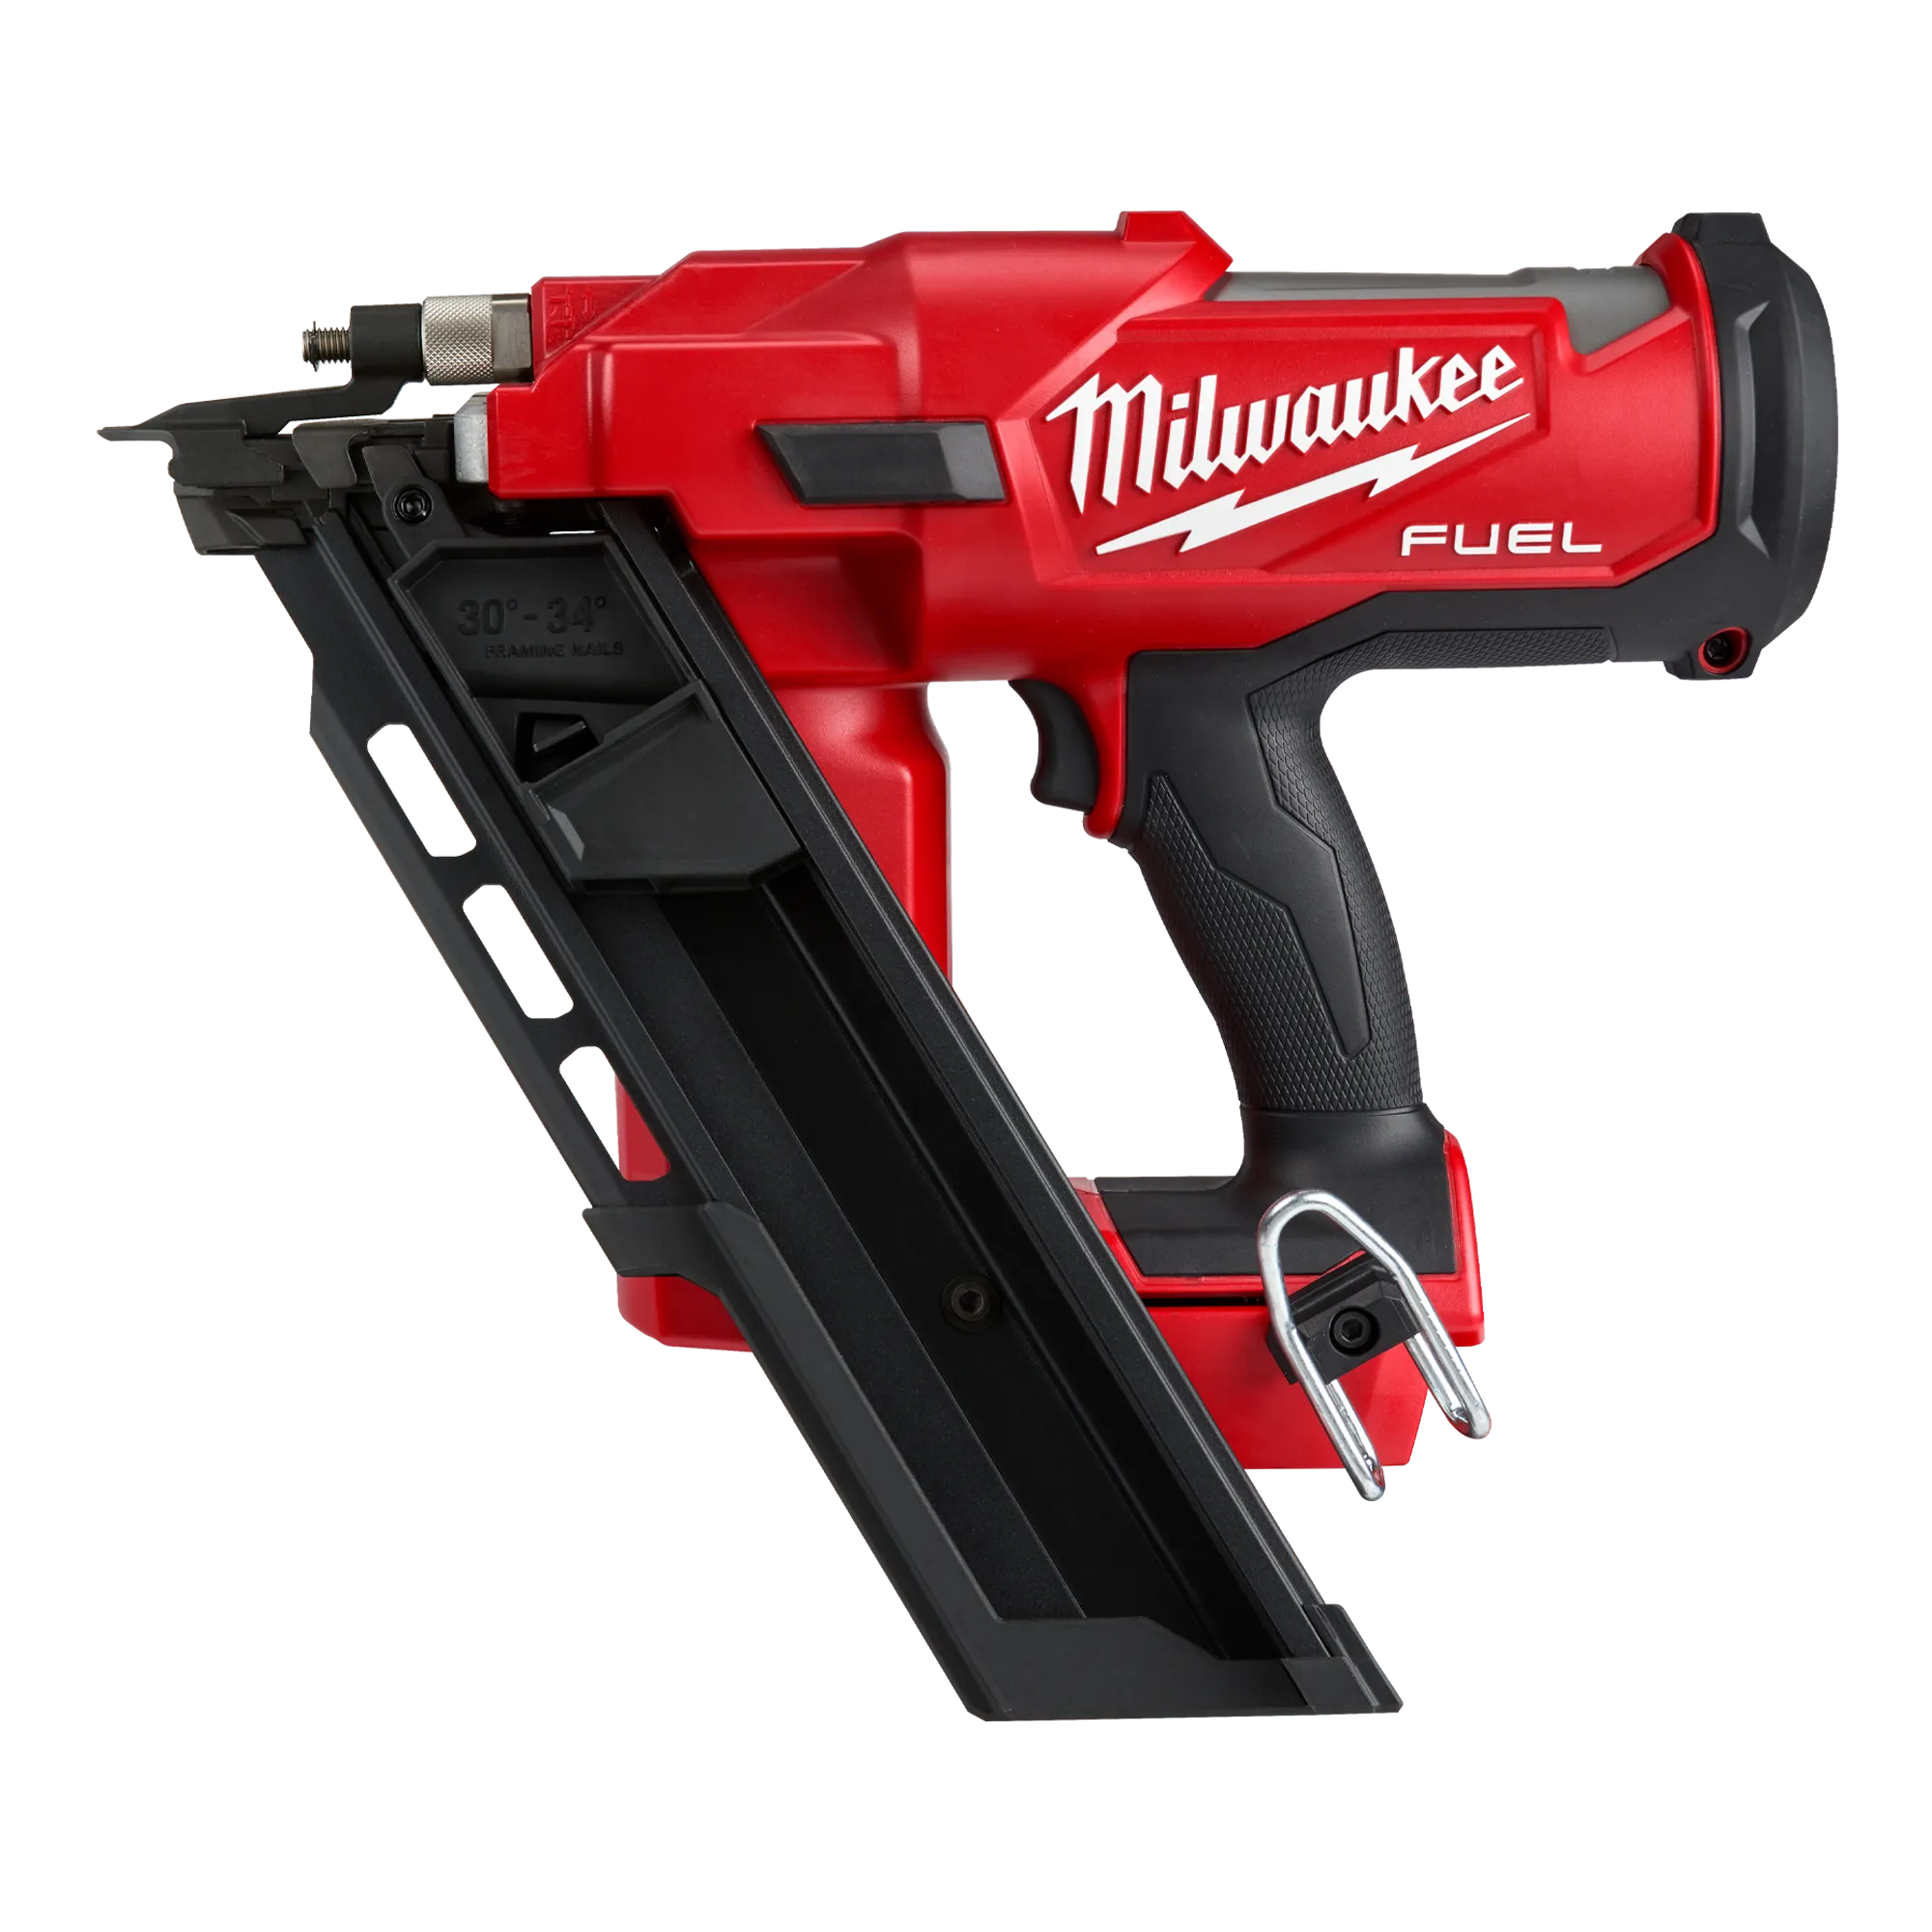 Milwaukee M18 Fuel 30 Degree Framing Nailer Extended Capacity Magazine for sale online